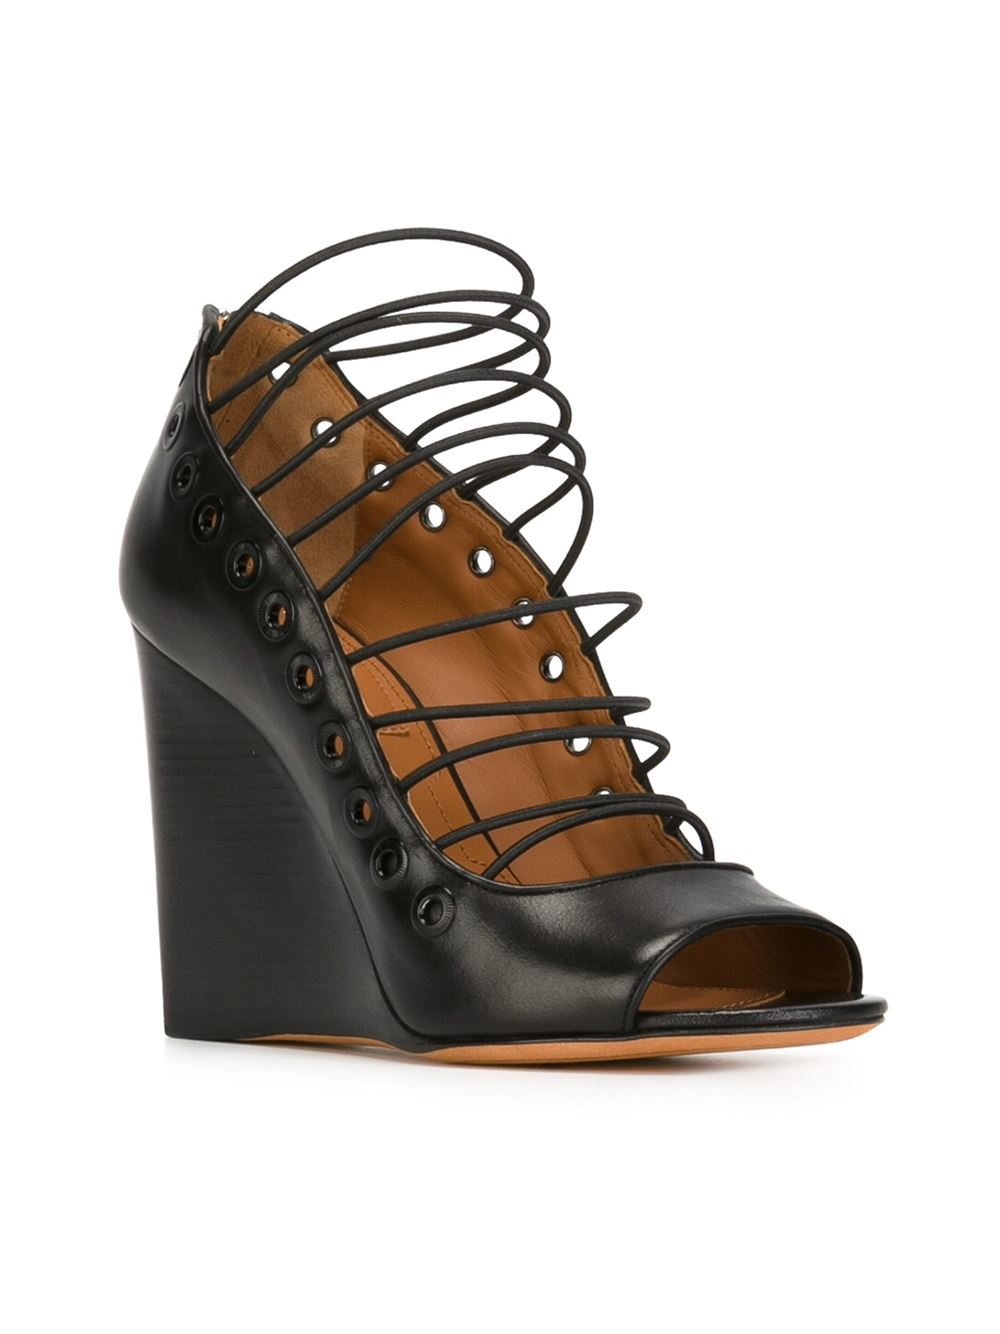 Givenchy Bondage Wedge Sandals in Black | Lyst